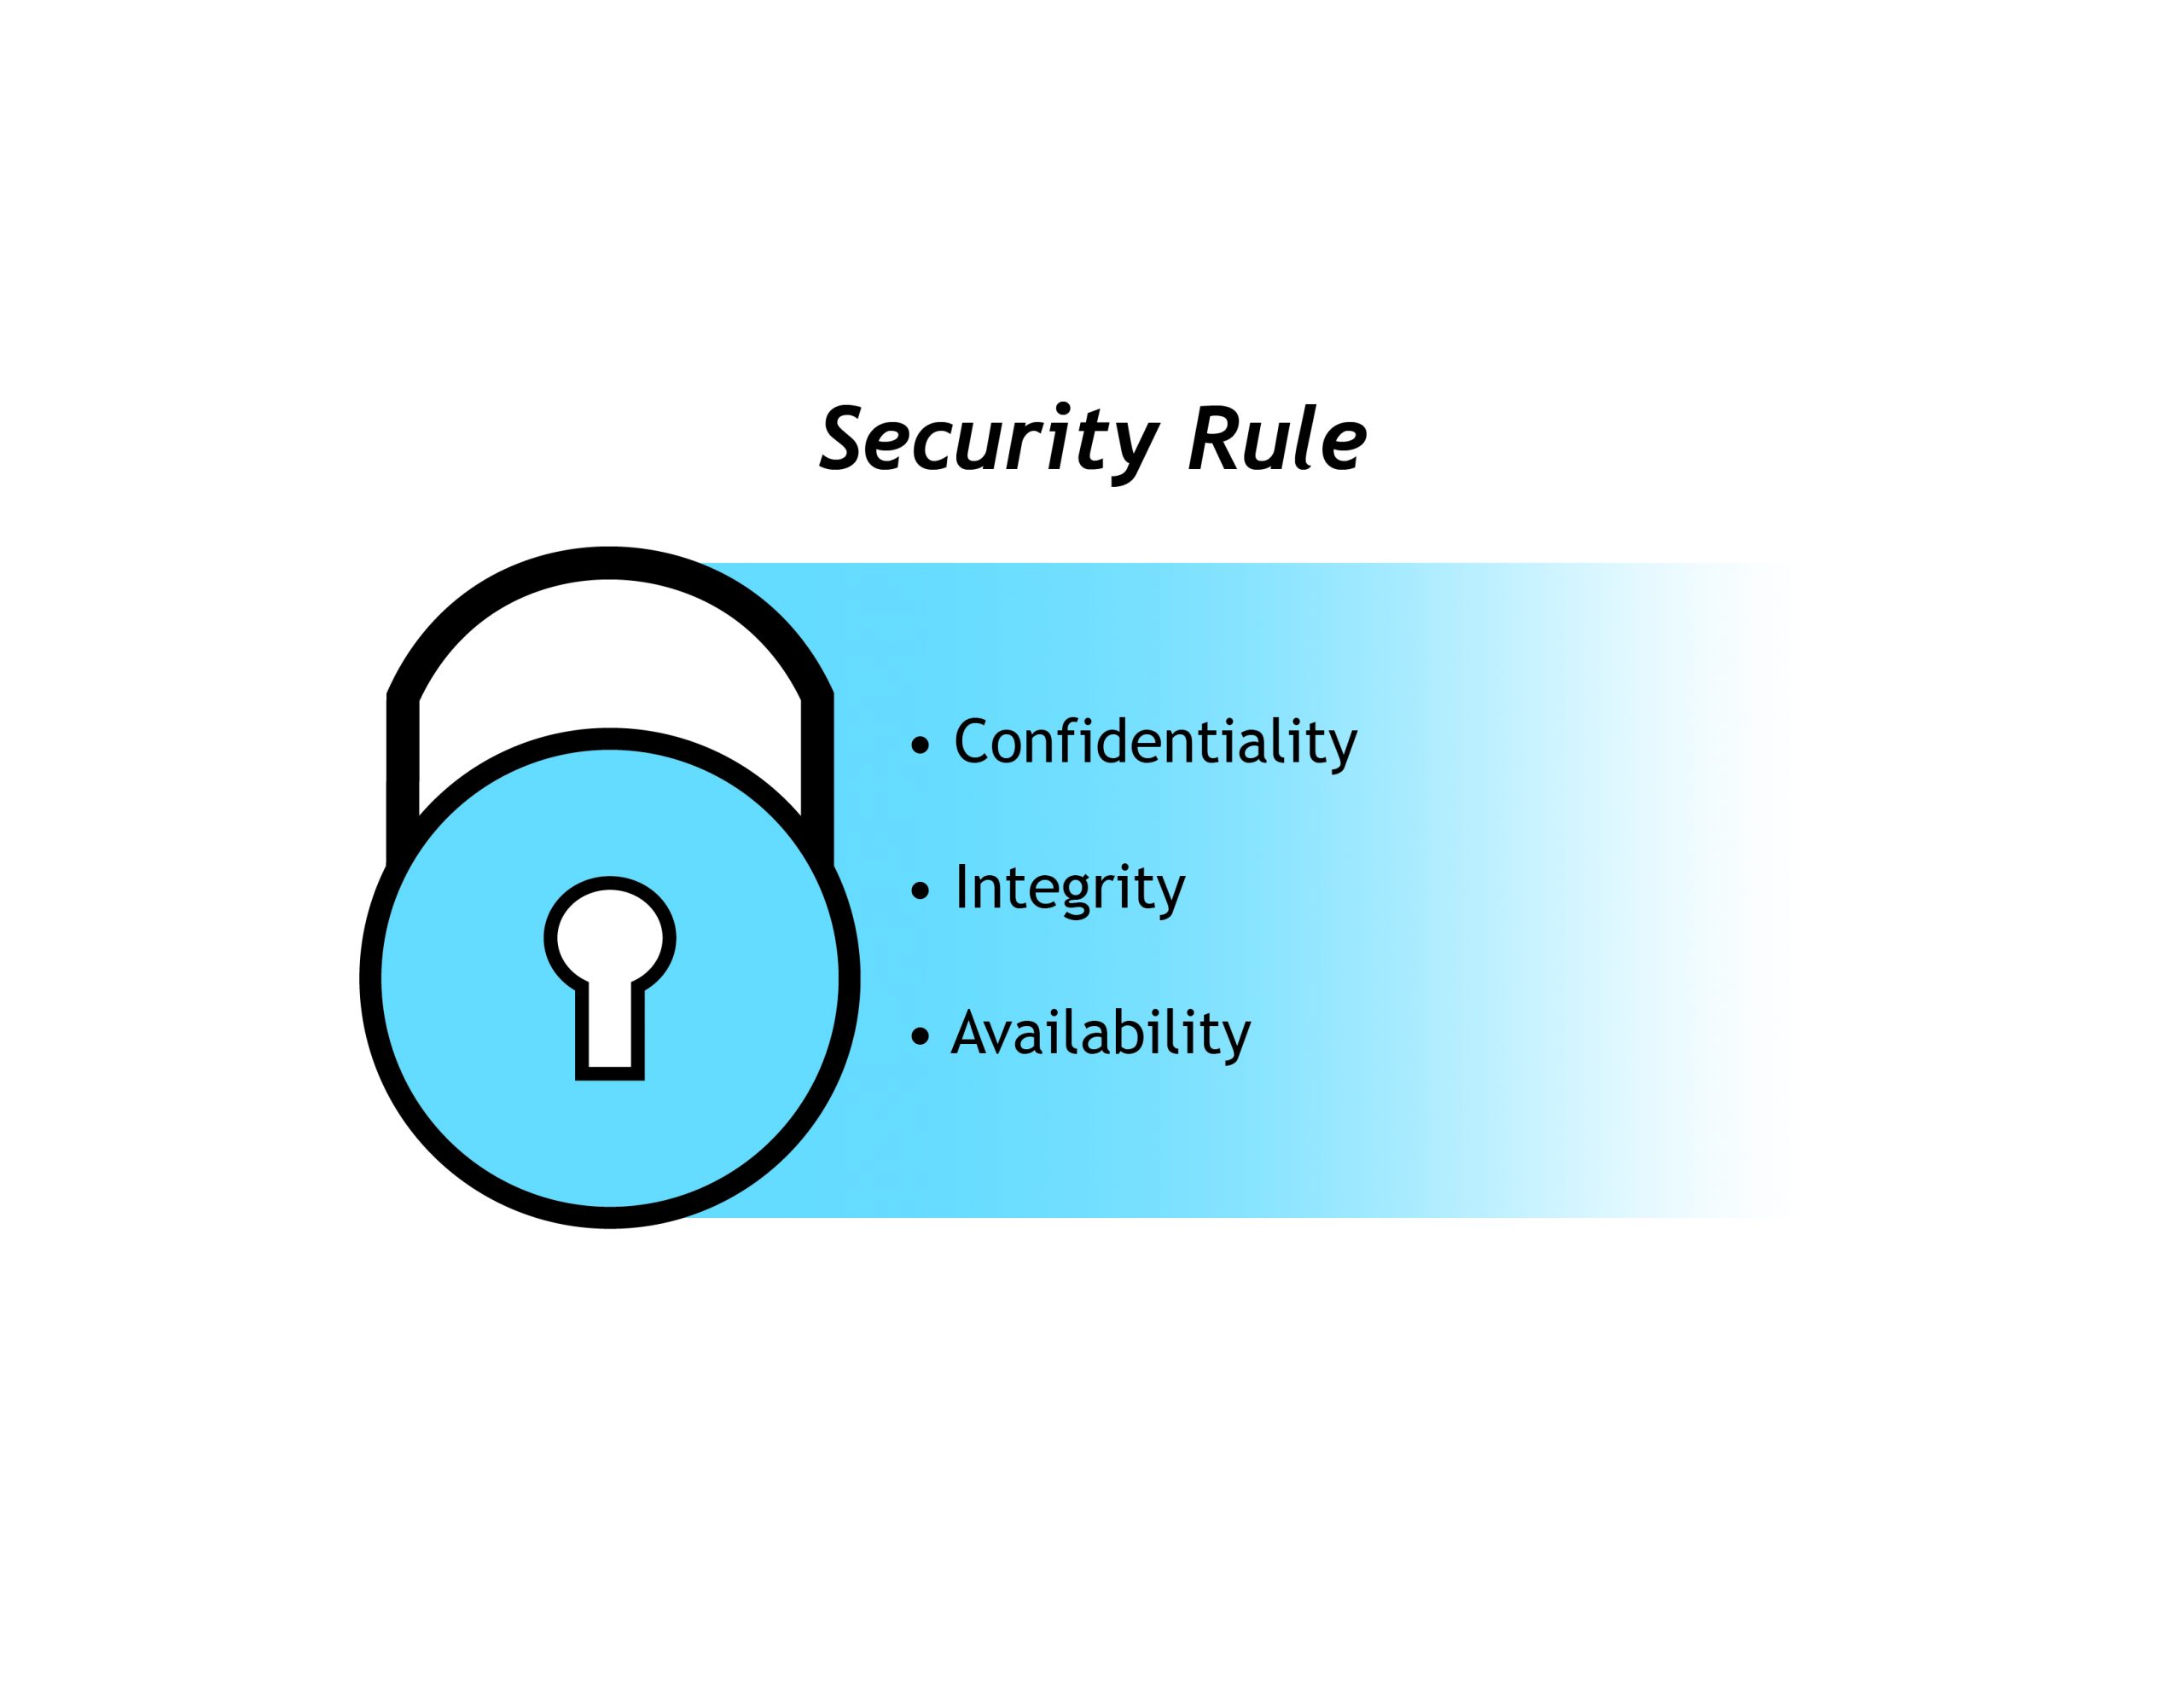 Security Rule graphic